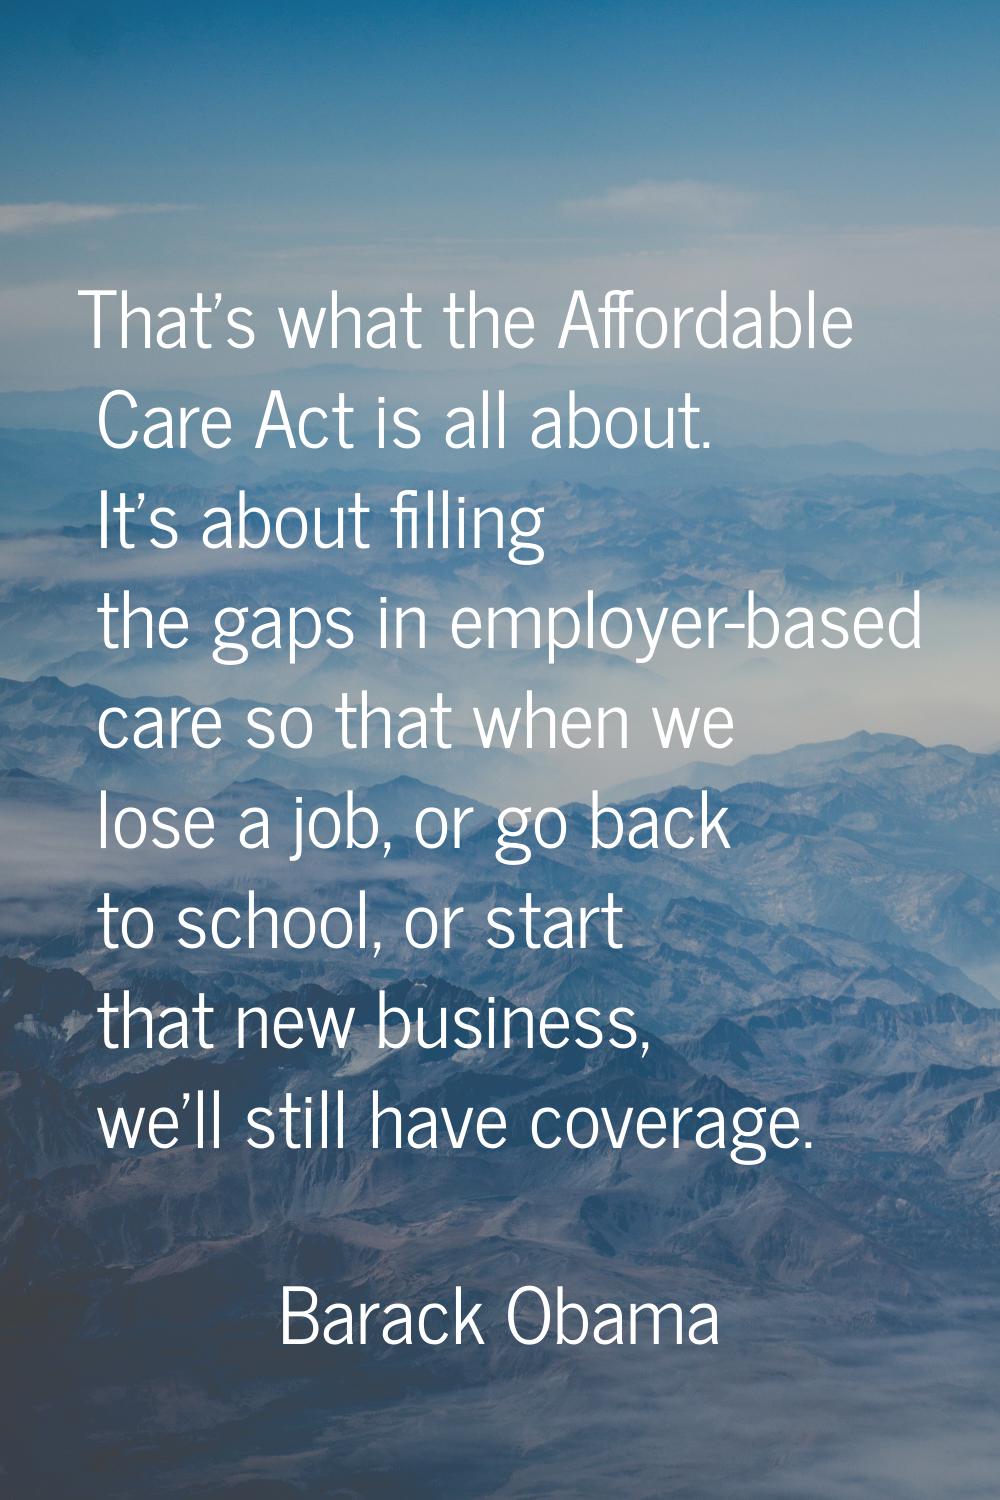 That's what the Affordable Care Act is all about. It's about filling the gaps in employer-based car